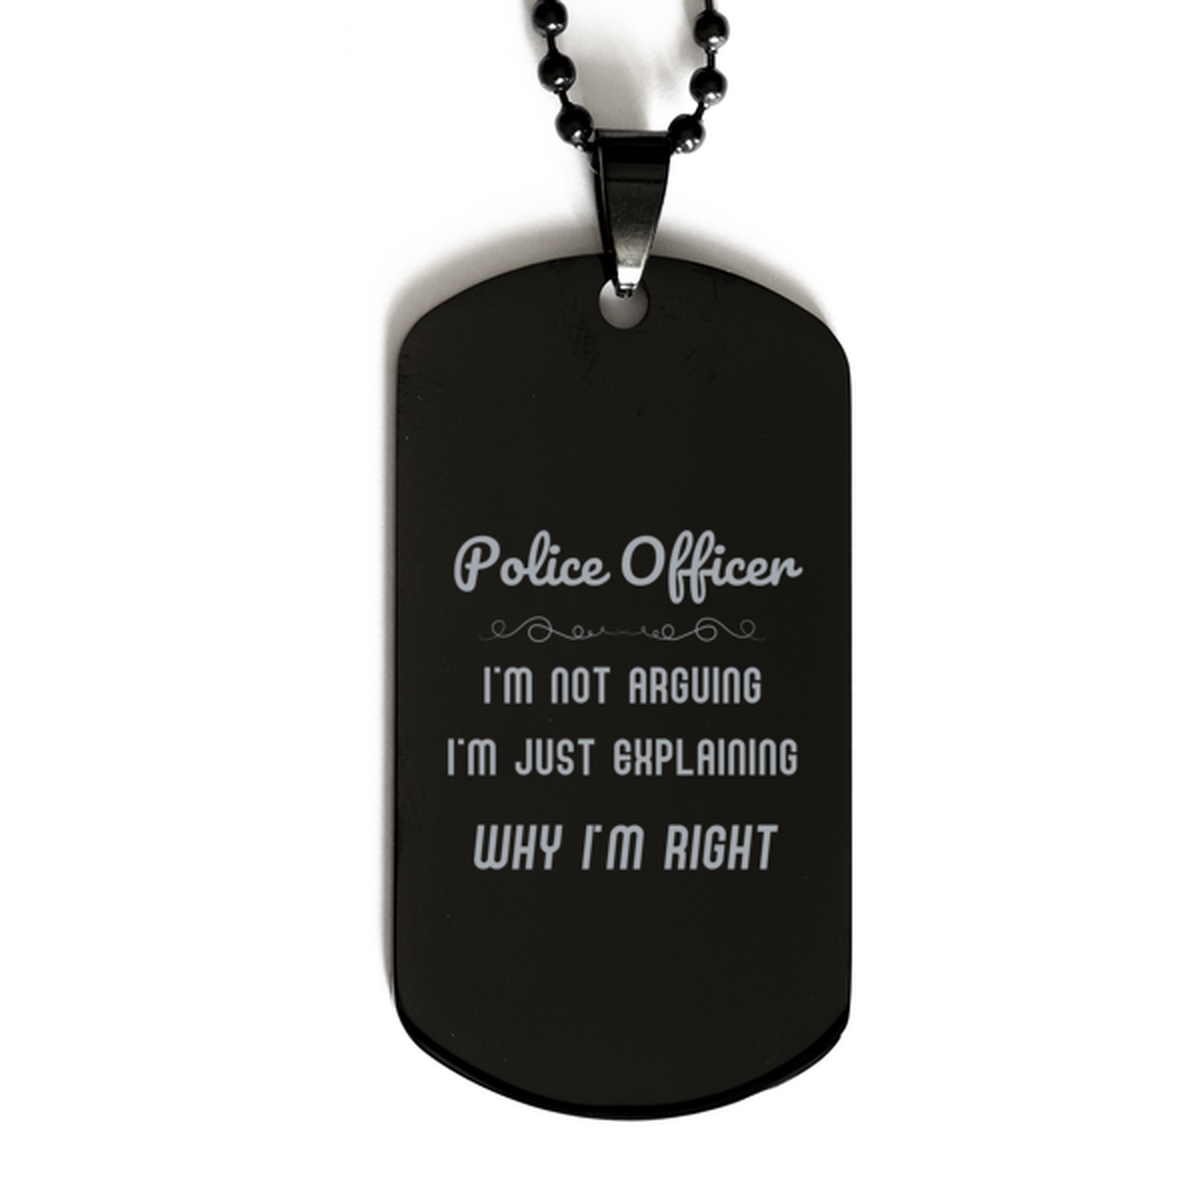 Police Officer I'm not Arguing. I'm Just Explaining Why I'm RIGHT Black Dog Tag, Funny Saying Quote Police Officer Gifts For Police Officer Graduation Birthday Christmas Gifts for Men Women Coworker